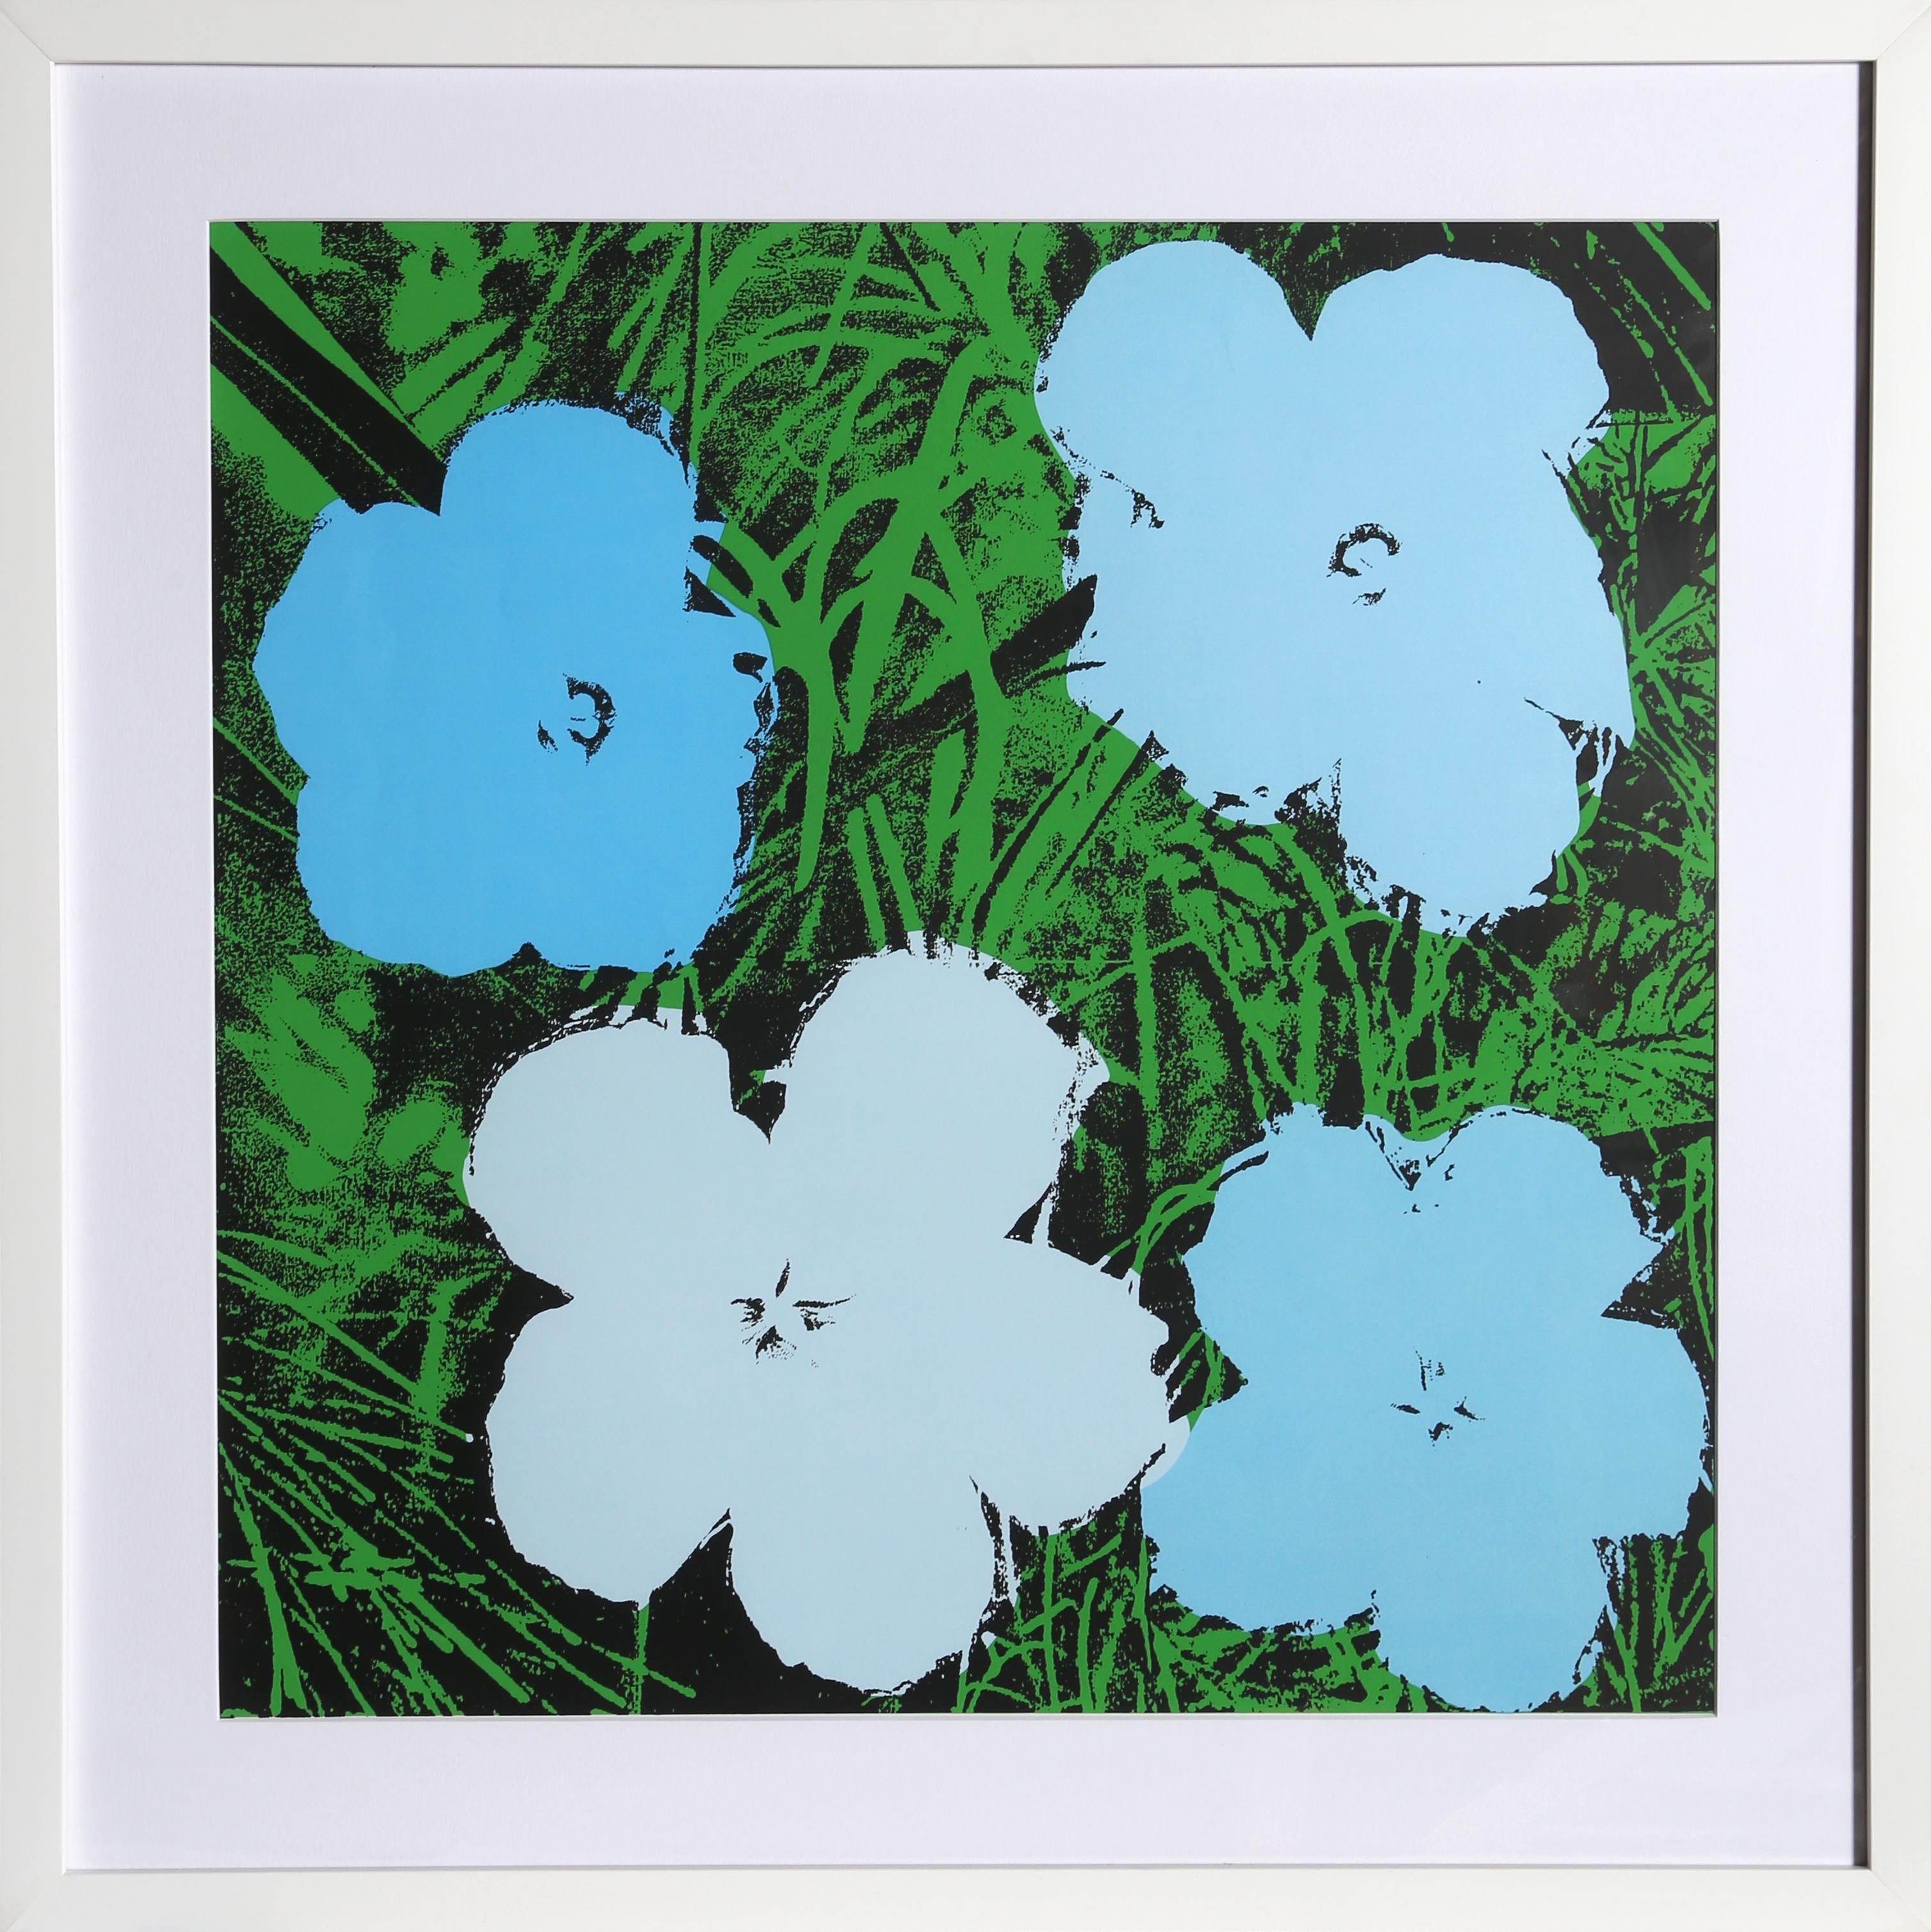 This screenprint poster by Andy Warhol features the iconic four flowers motif that he regularly used for a variety of prints and paintings. These four flowers appear on a green background and are all different shades of light blue.

Flowers